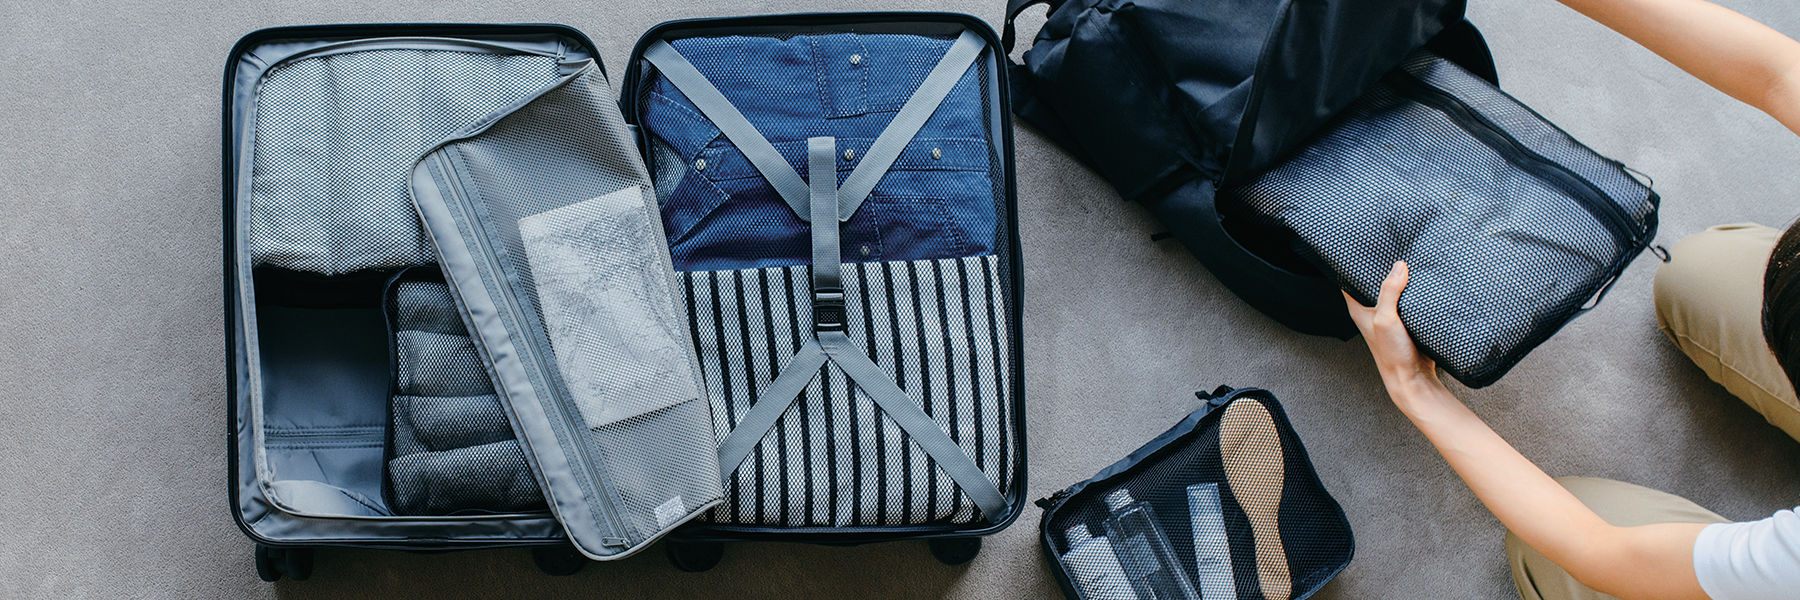 MUJI hard shell luggage and travel accessories